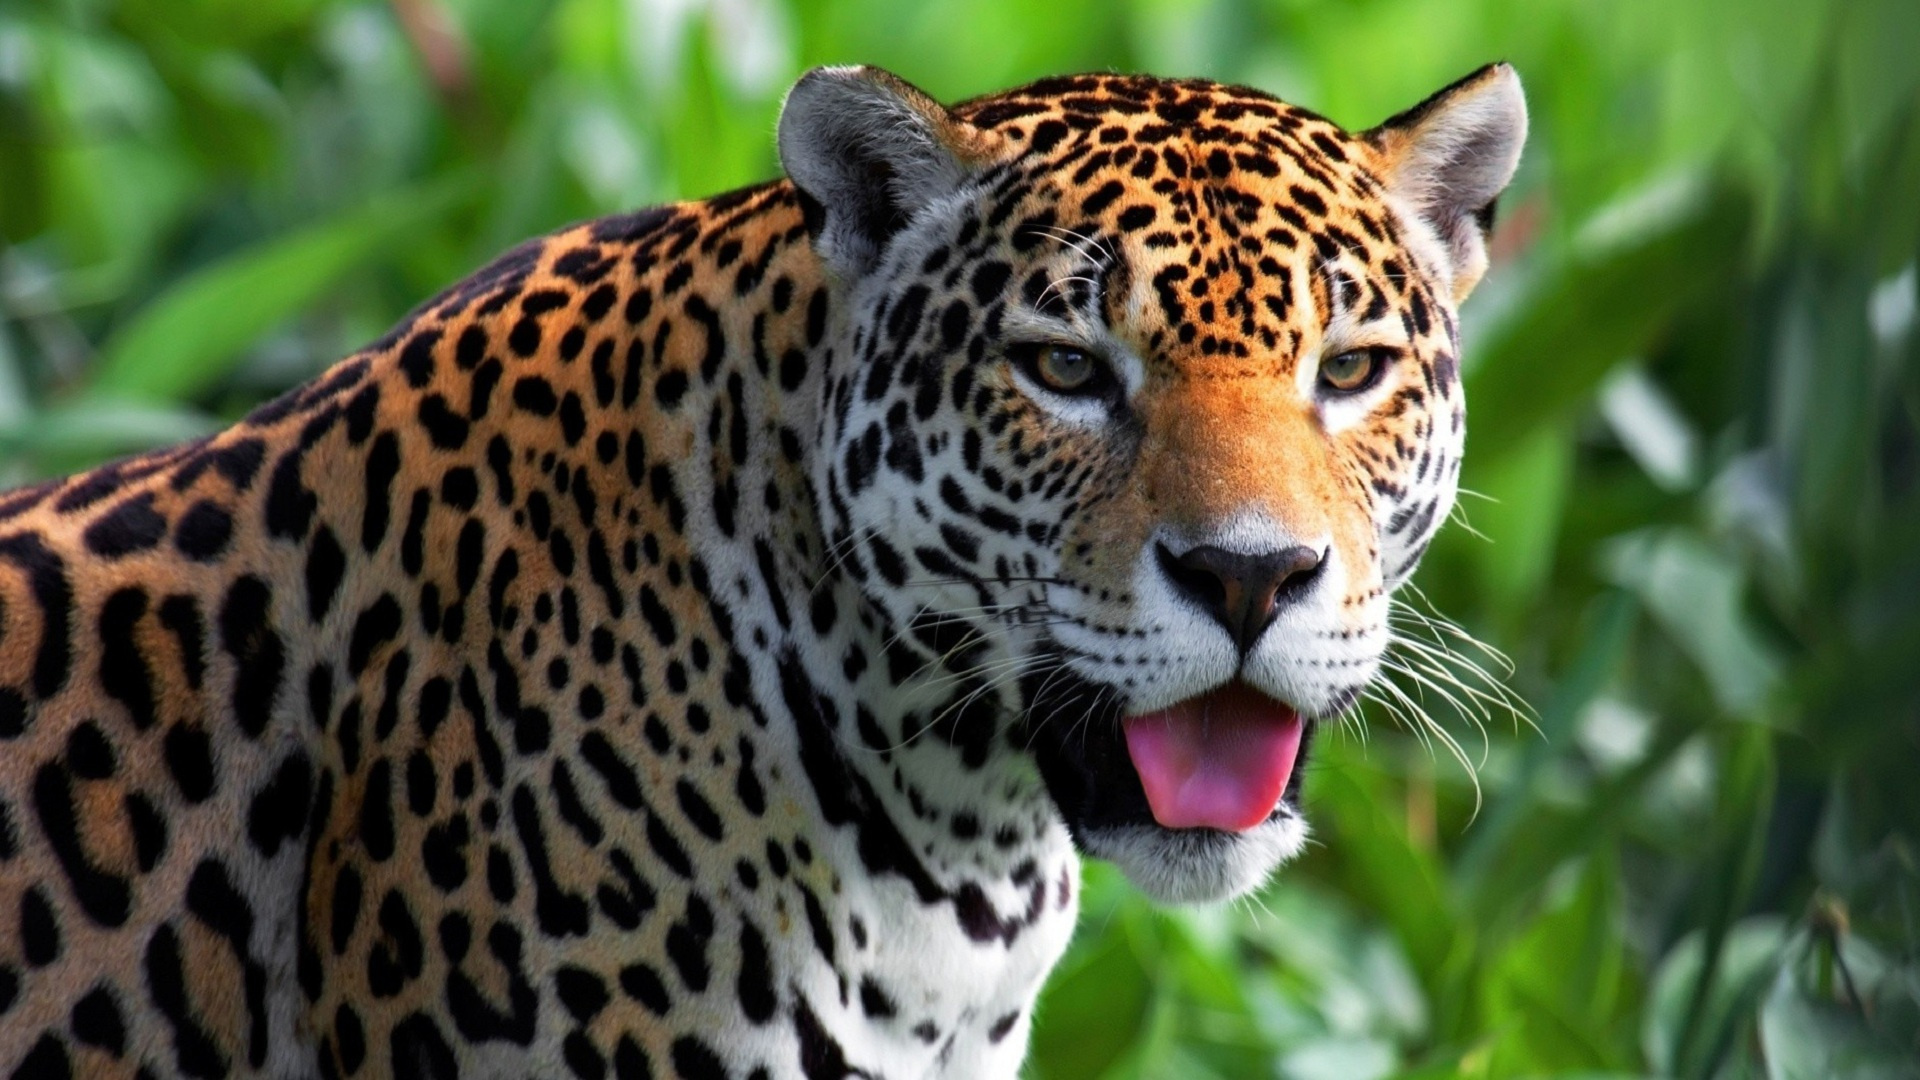 260+ Jaguar HD Wallpapers and Backgrounds